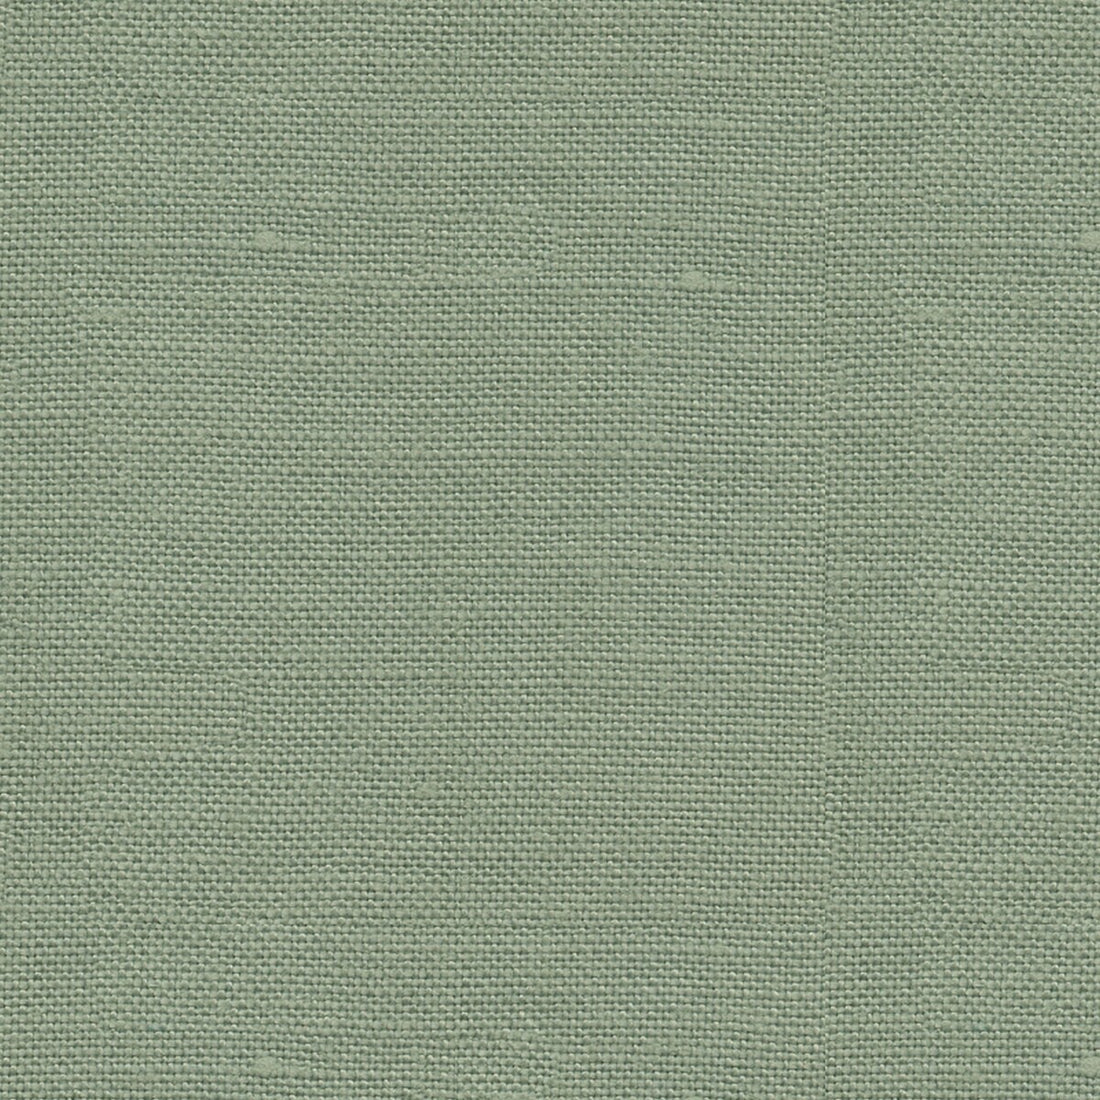 Lea fabric in celadon color - pattern J0337.770.0 - by G P &amp; J Baker in the Crayford collection